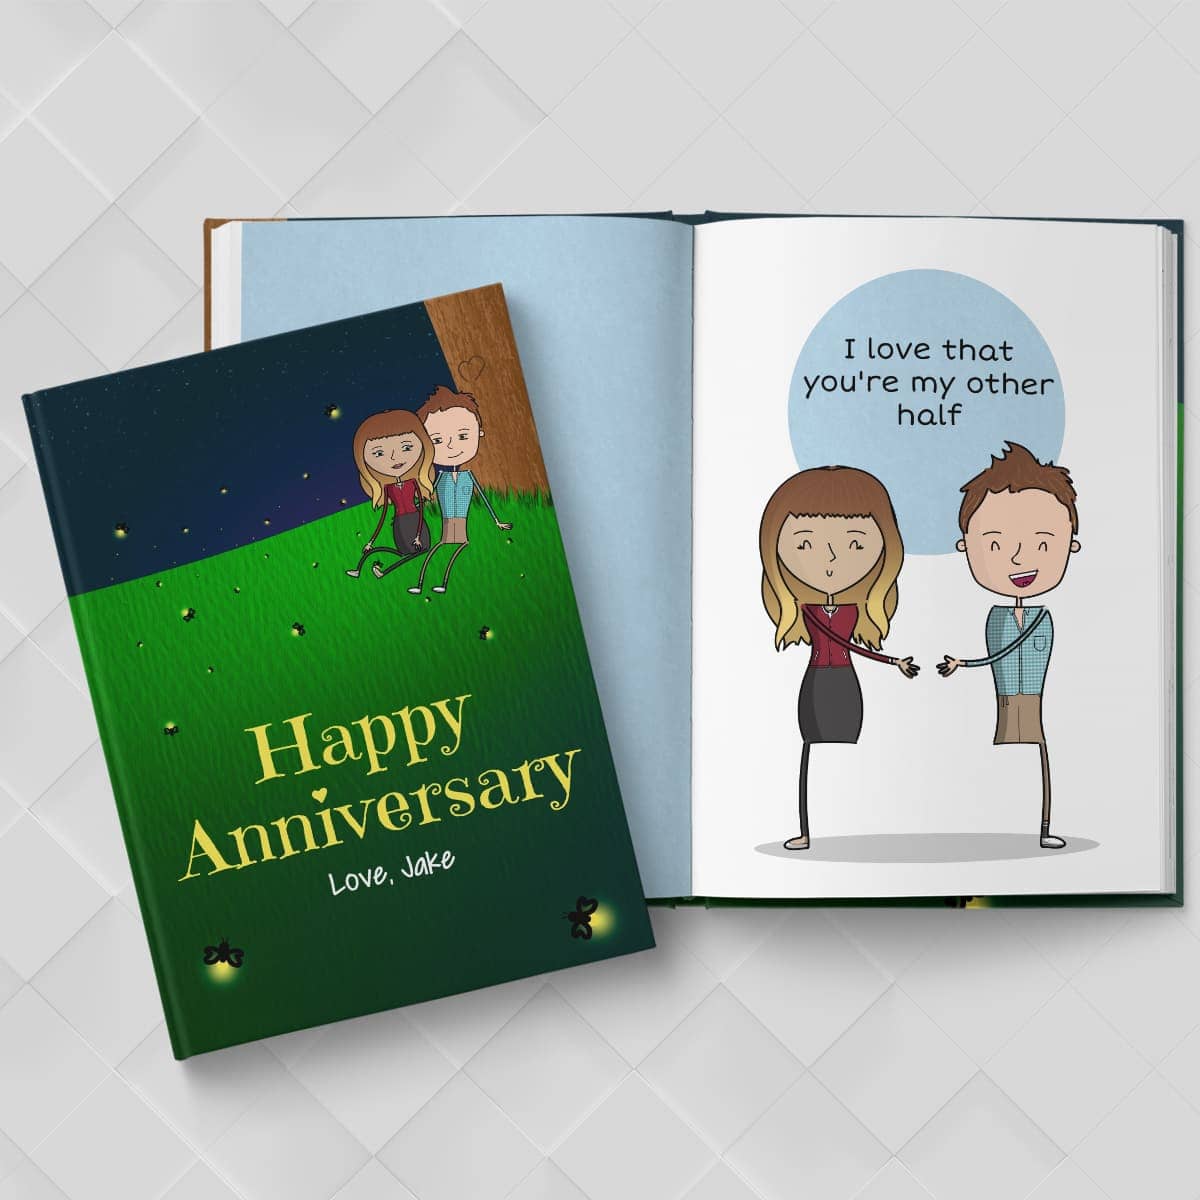 V. How to Personalize an Anniversary Gift 